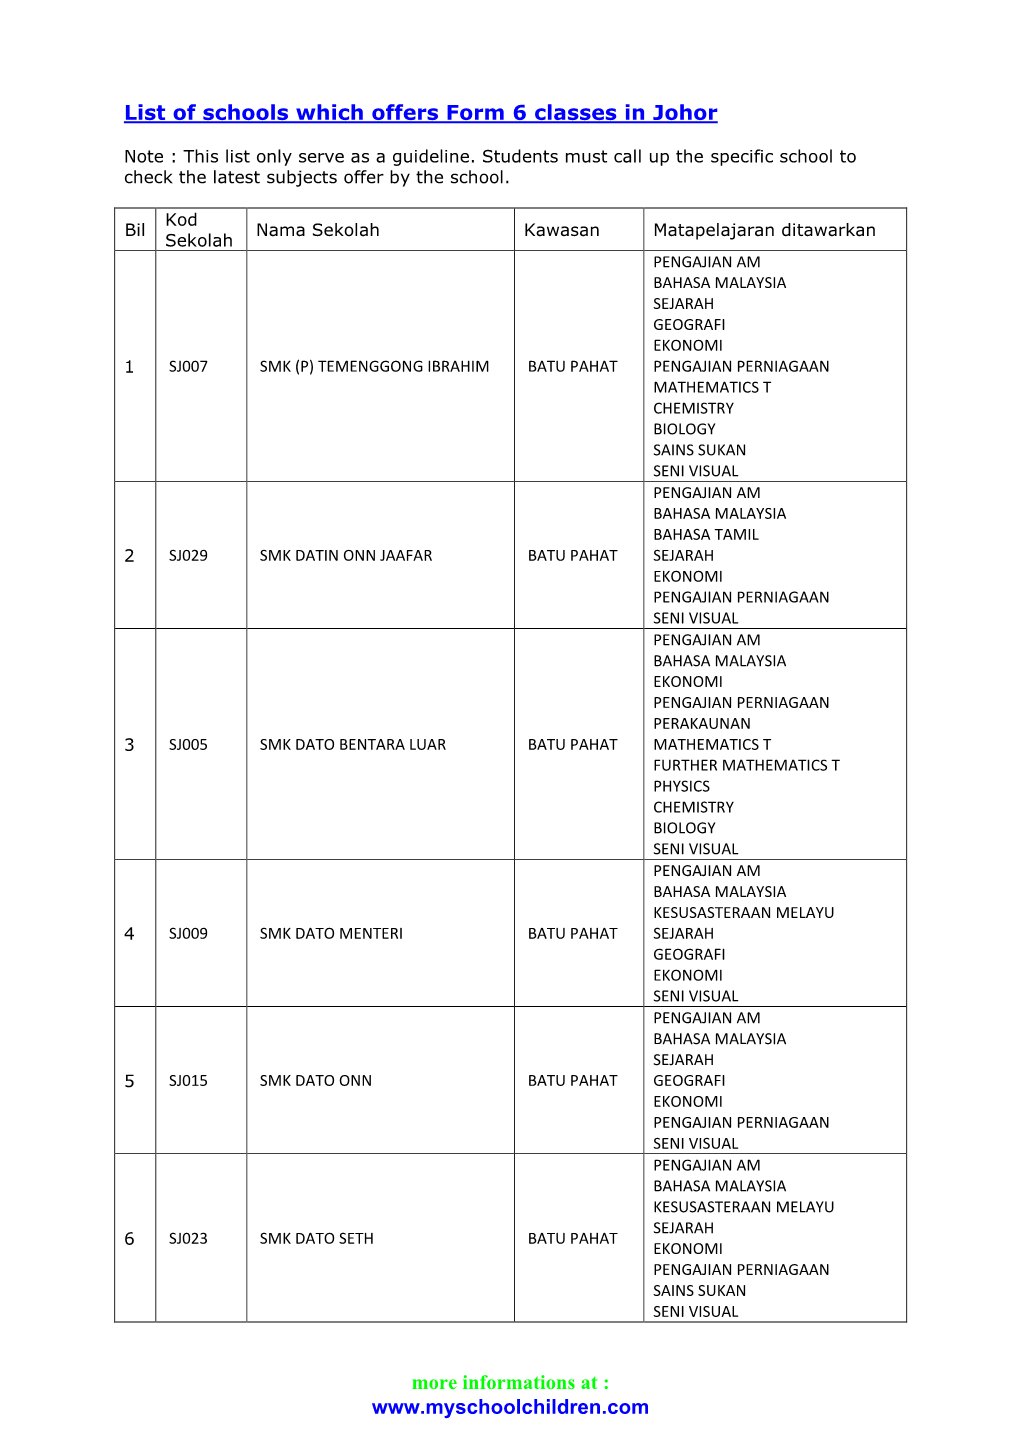 List of Schools Which Offers Form 6 Classes in Johor More Informations at